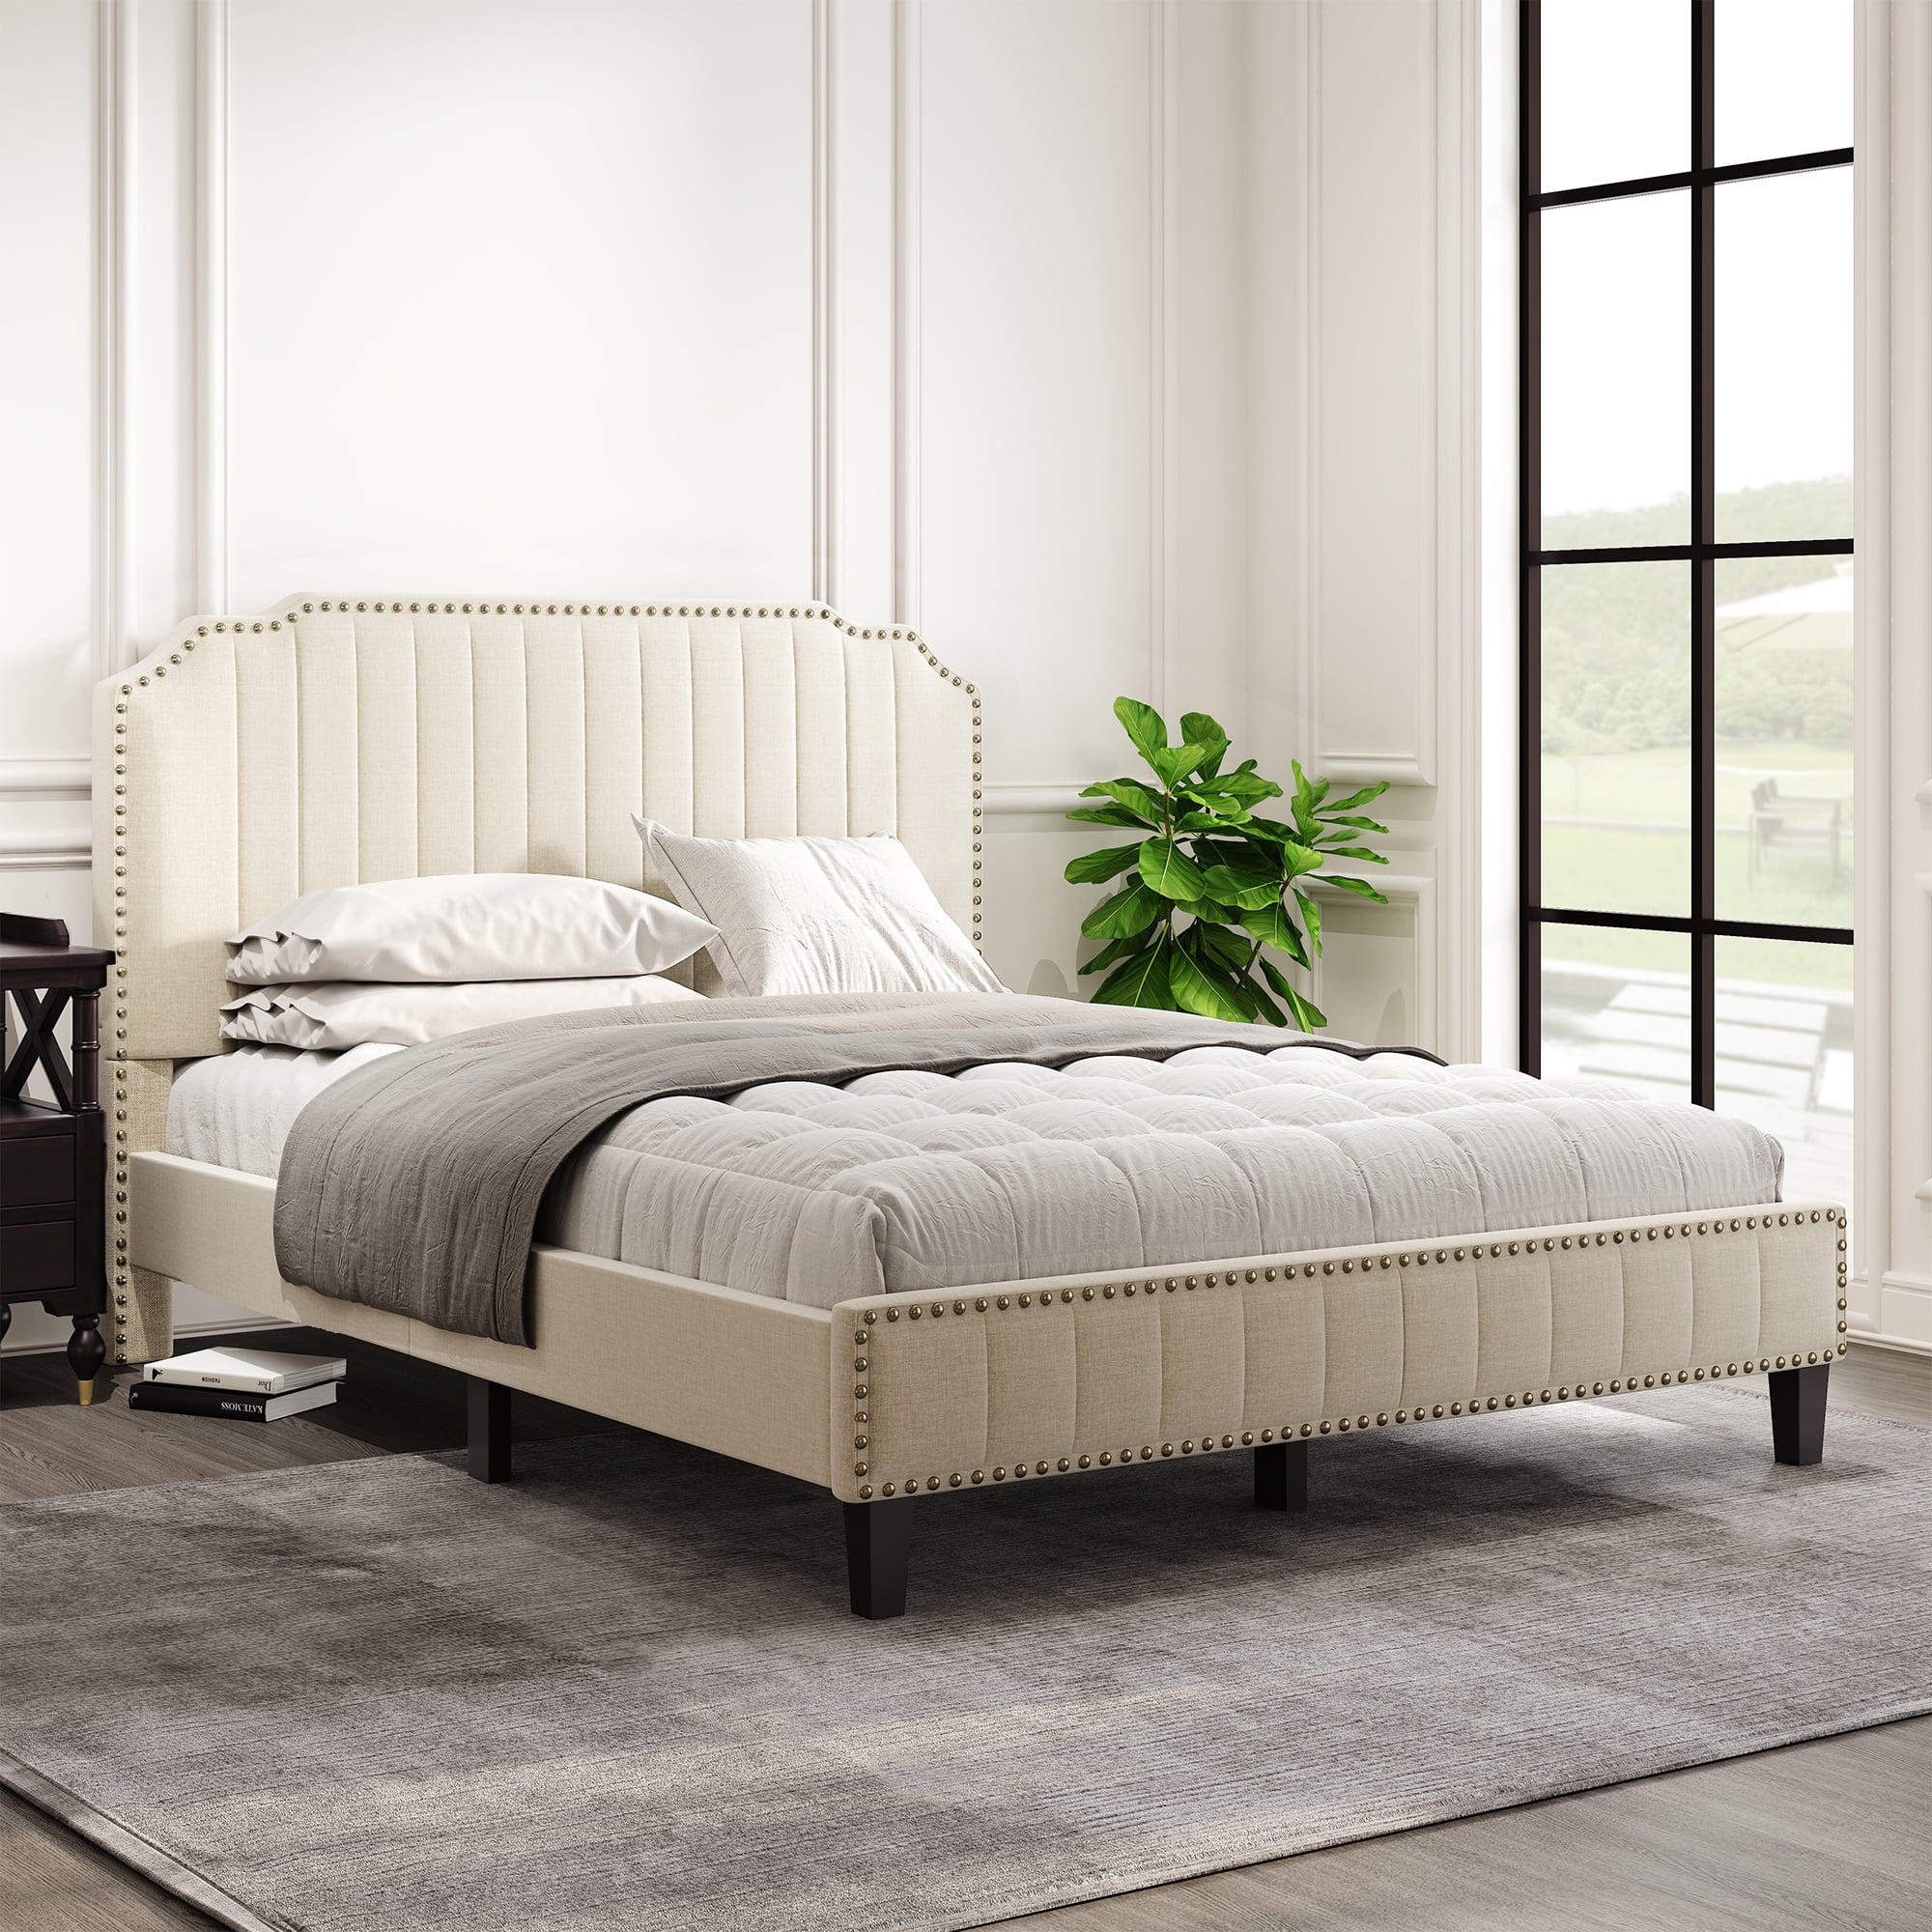 Queen Size Upholstered Linen Bed Frame Stable Wooden Foundation Beige 